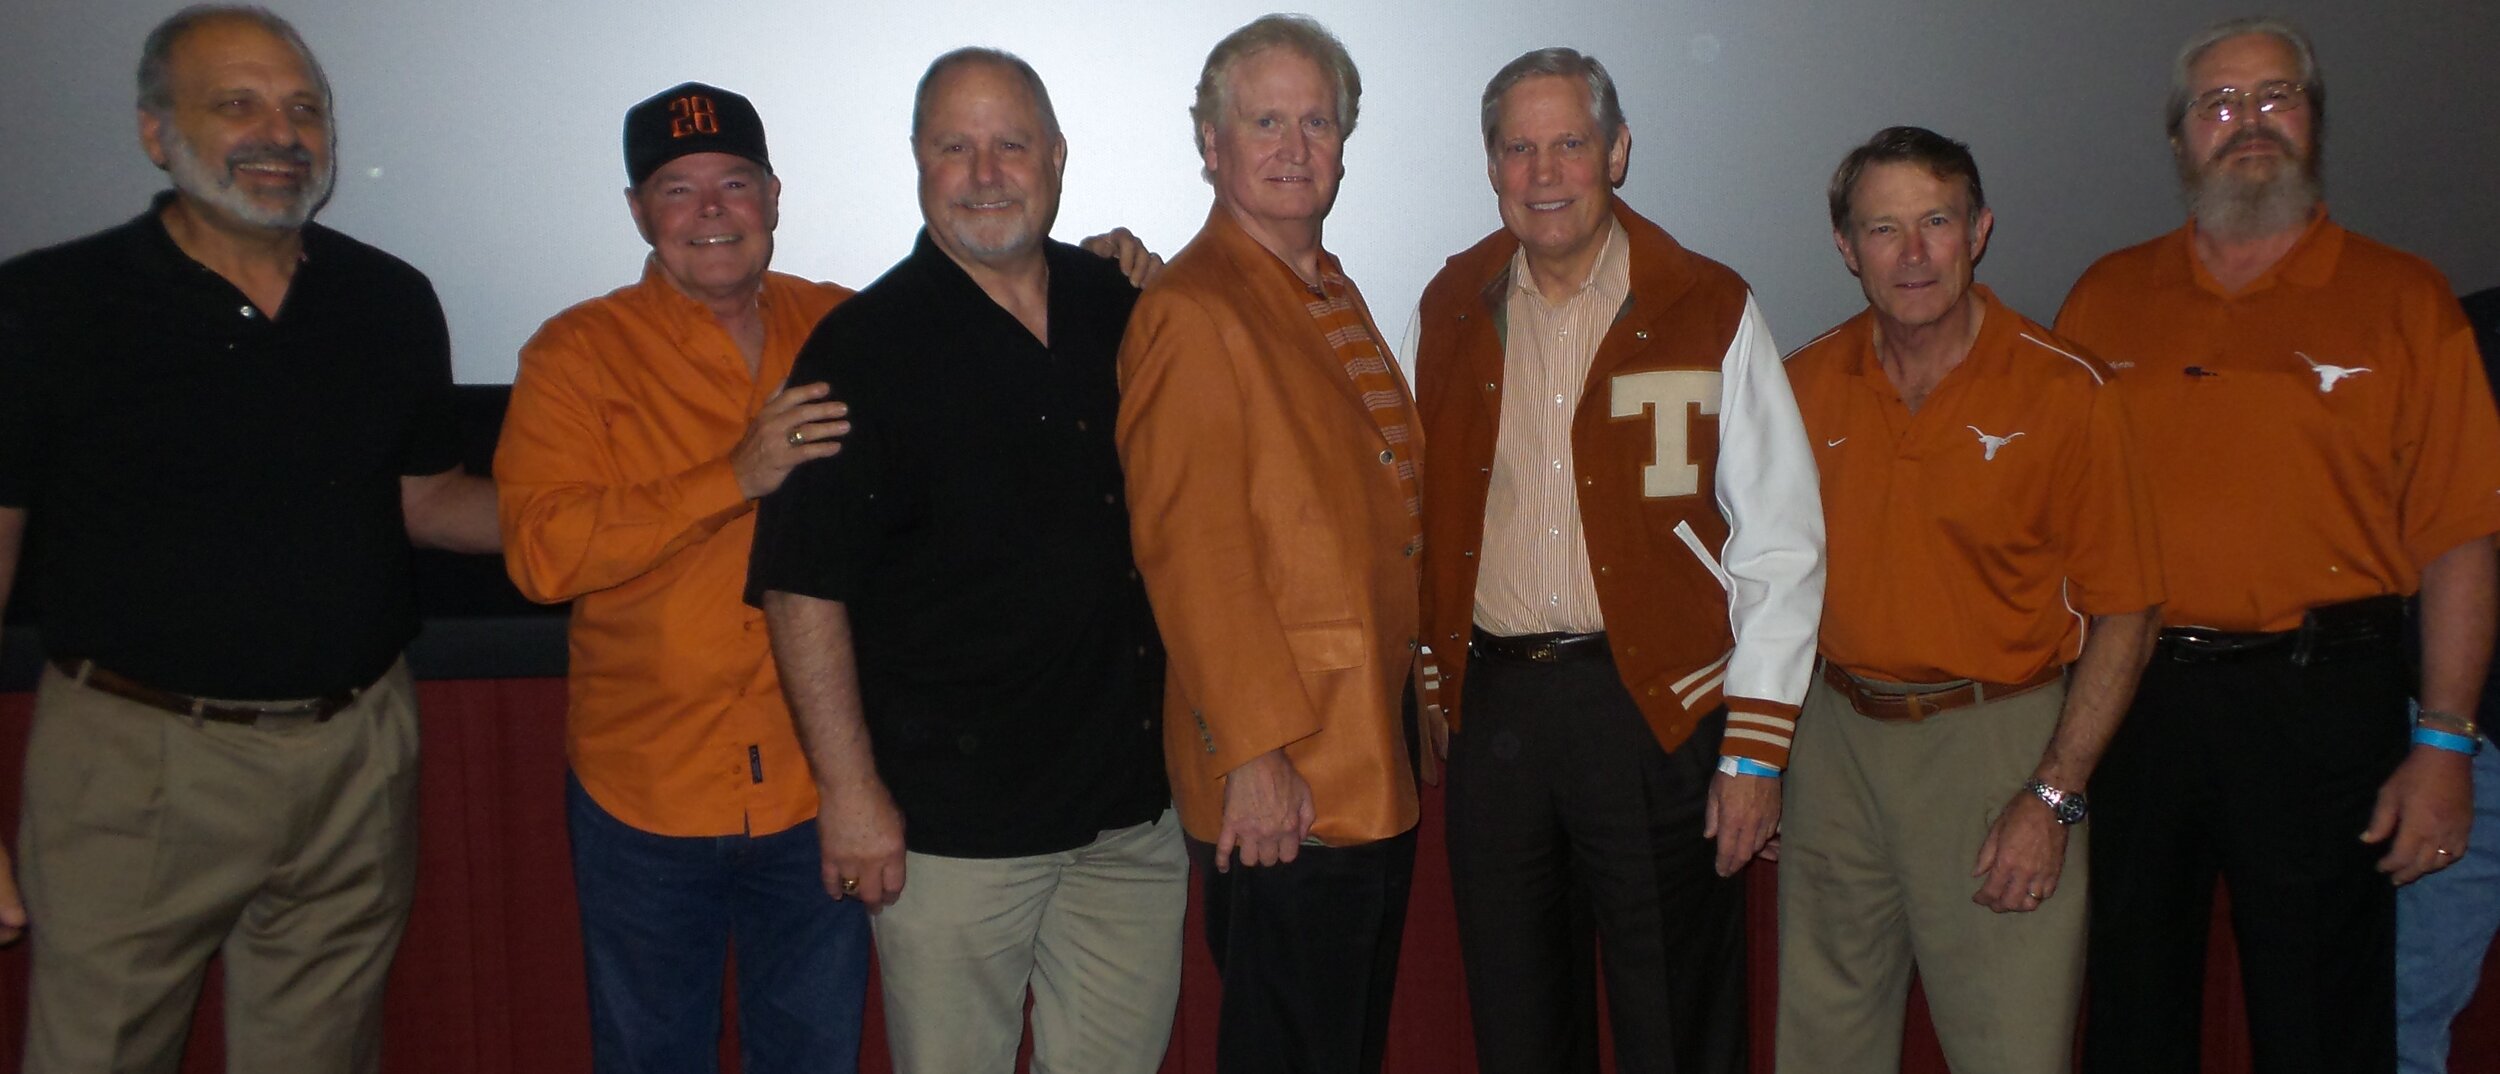 Bill Atessis, Billy Dale, Tommy Woodard, Benny Pace, Corby Robertson, Mike Campbell, and Bobby Wuensch. 